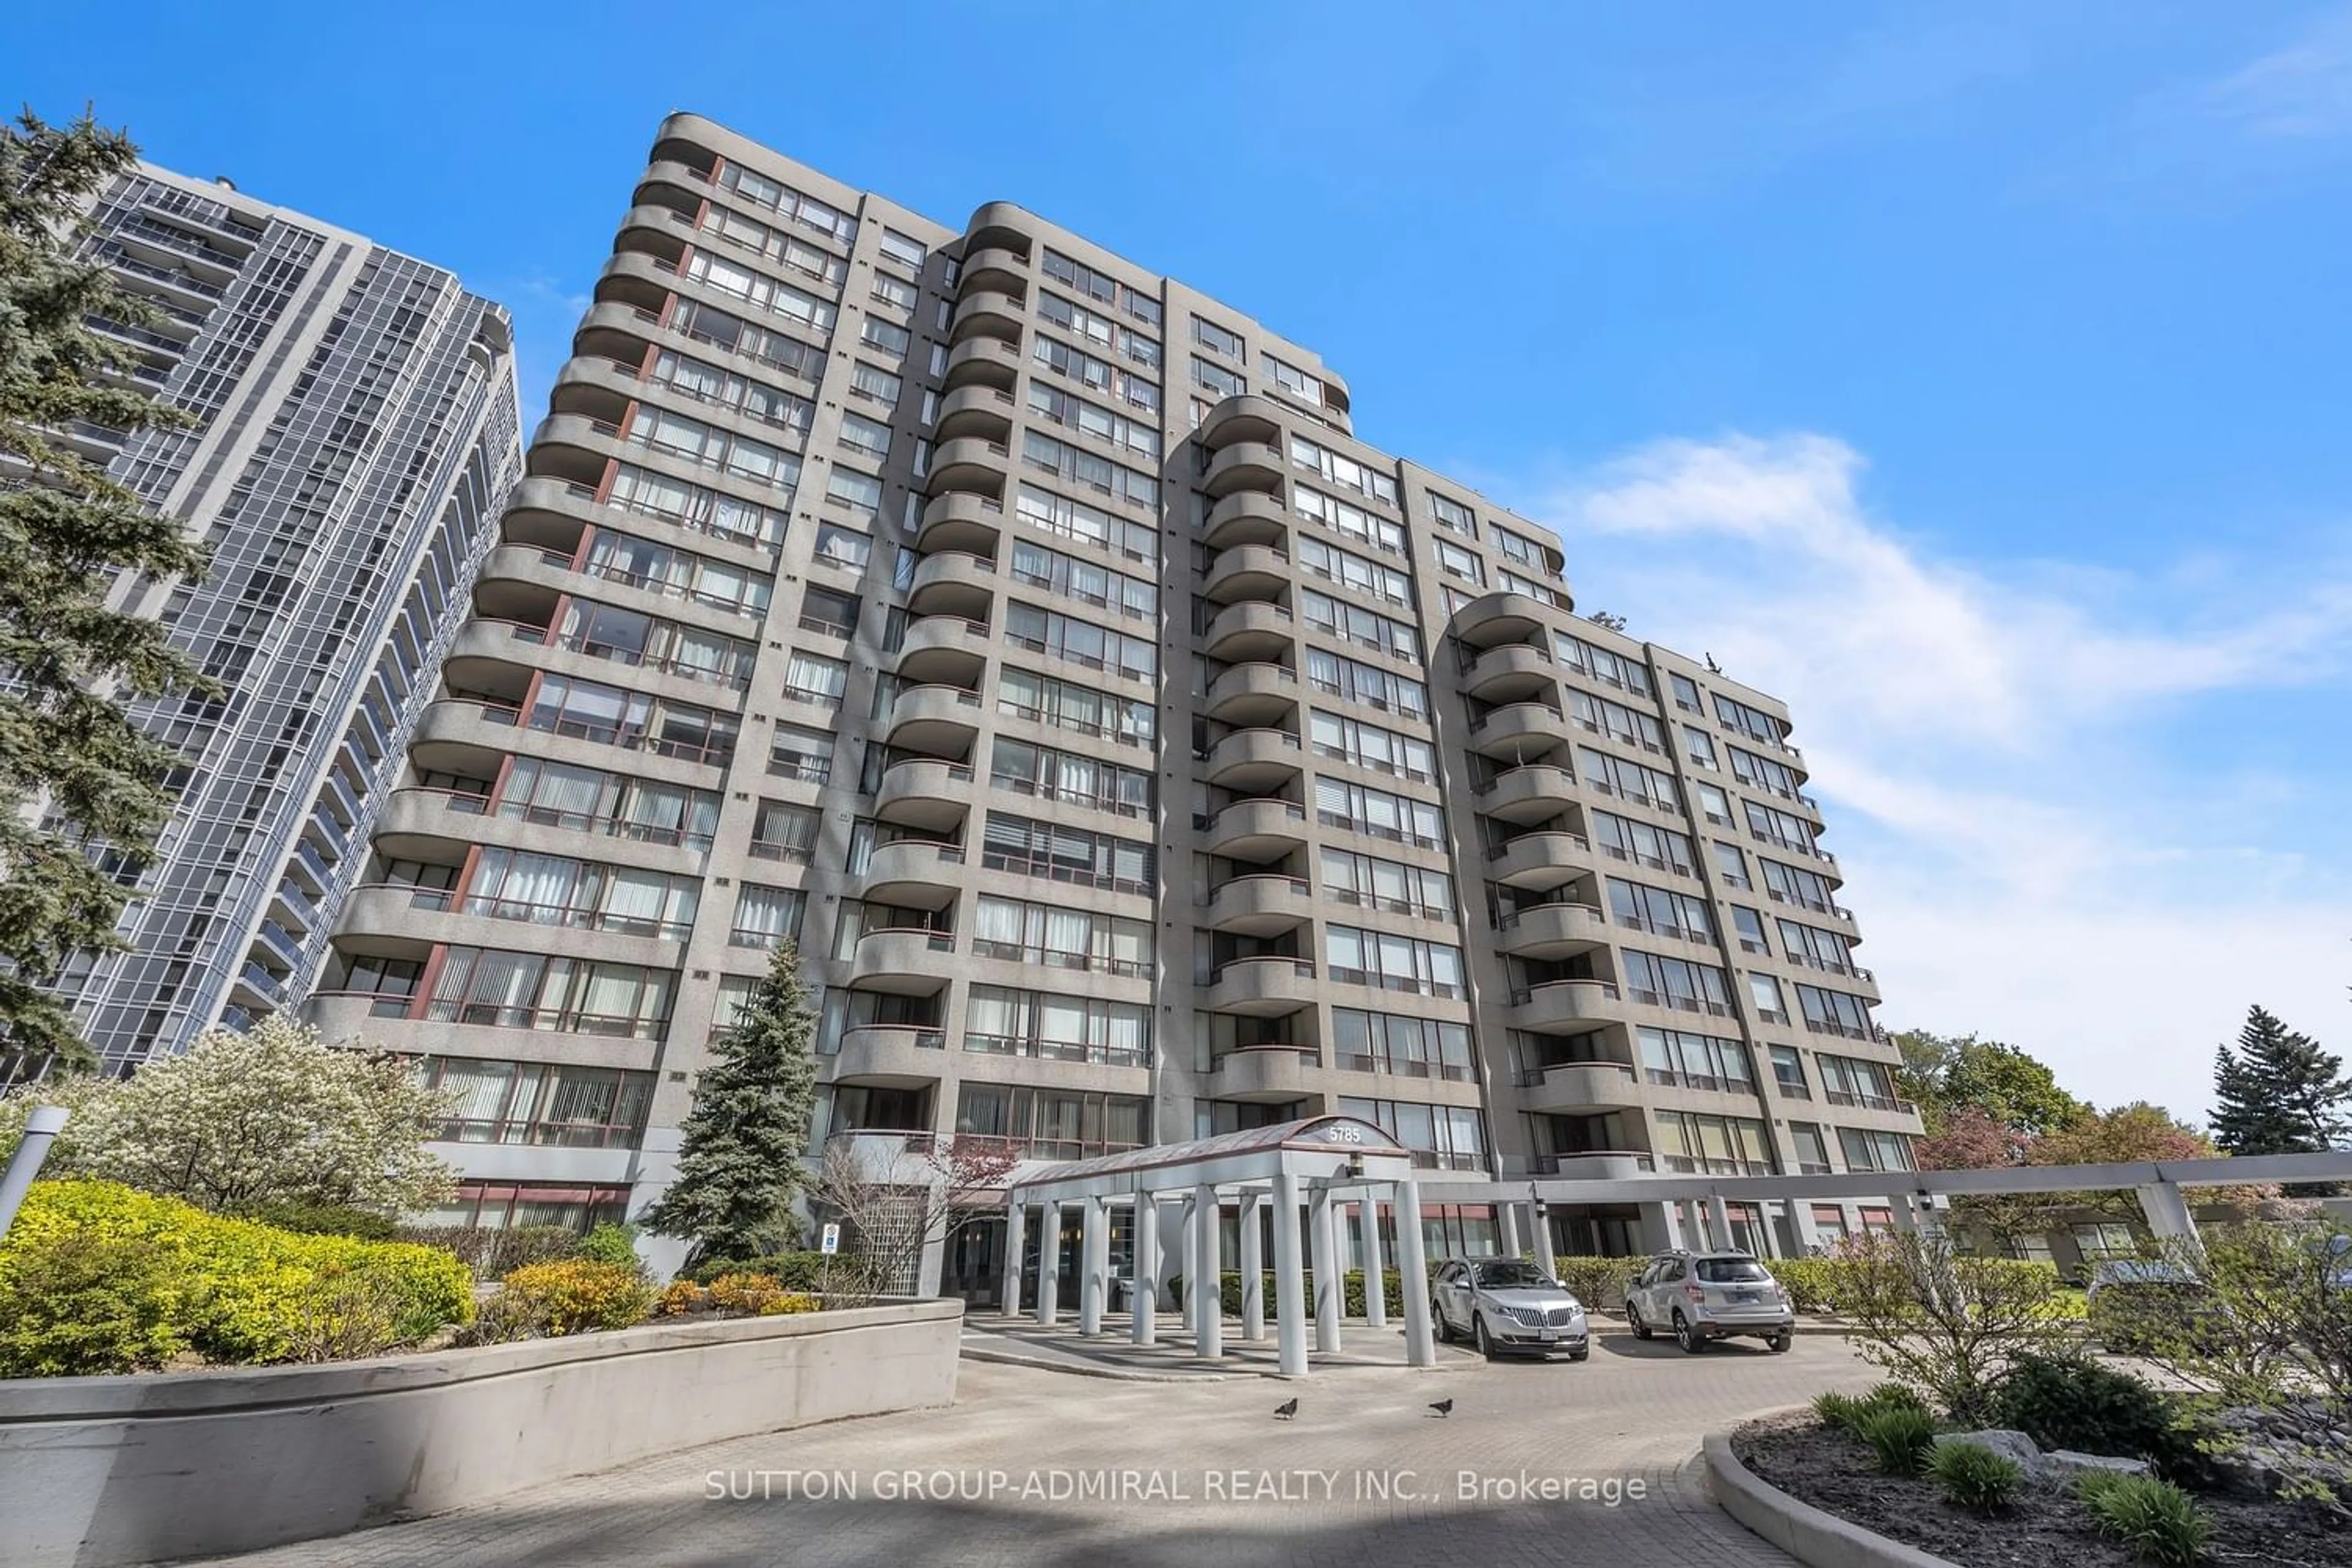 A pic from exterior of the house or condo for 5785 Yonge St #602, Toronto Ontario M2M 4J2